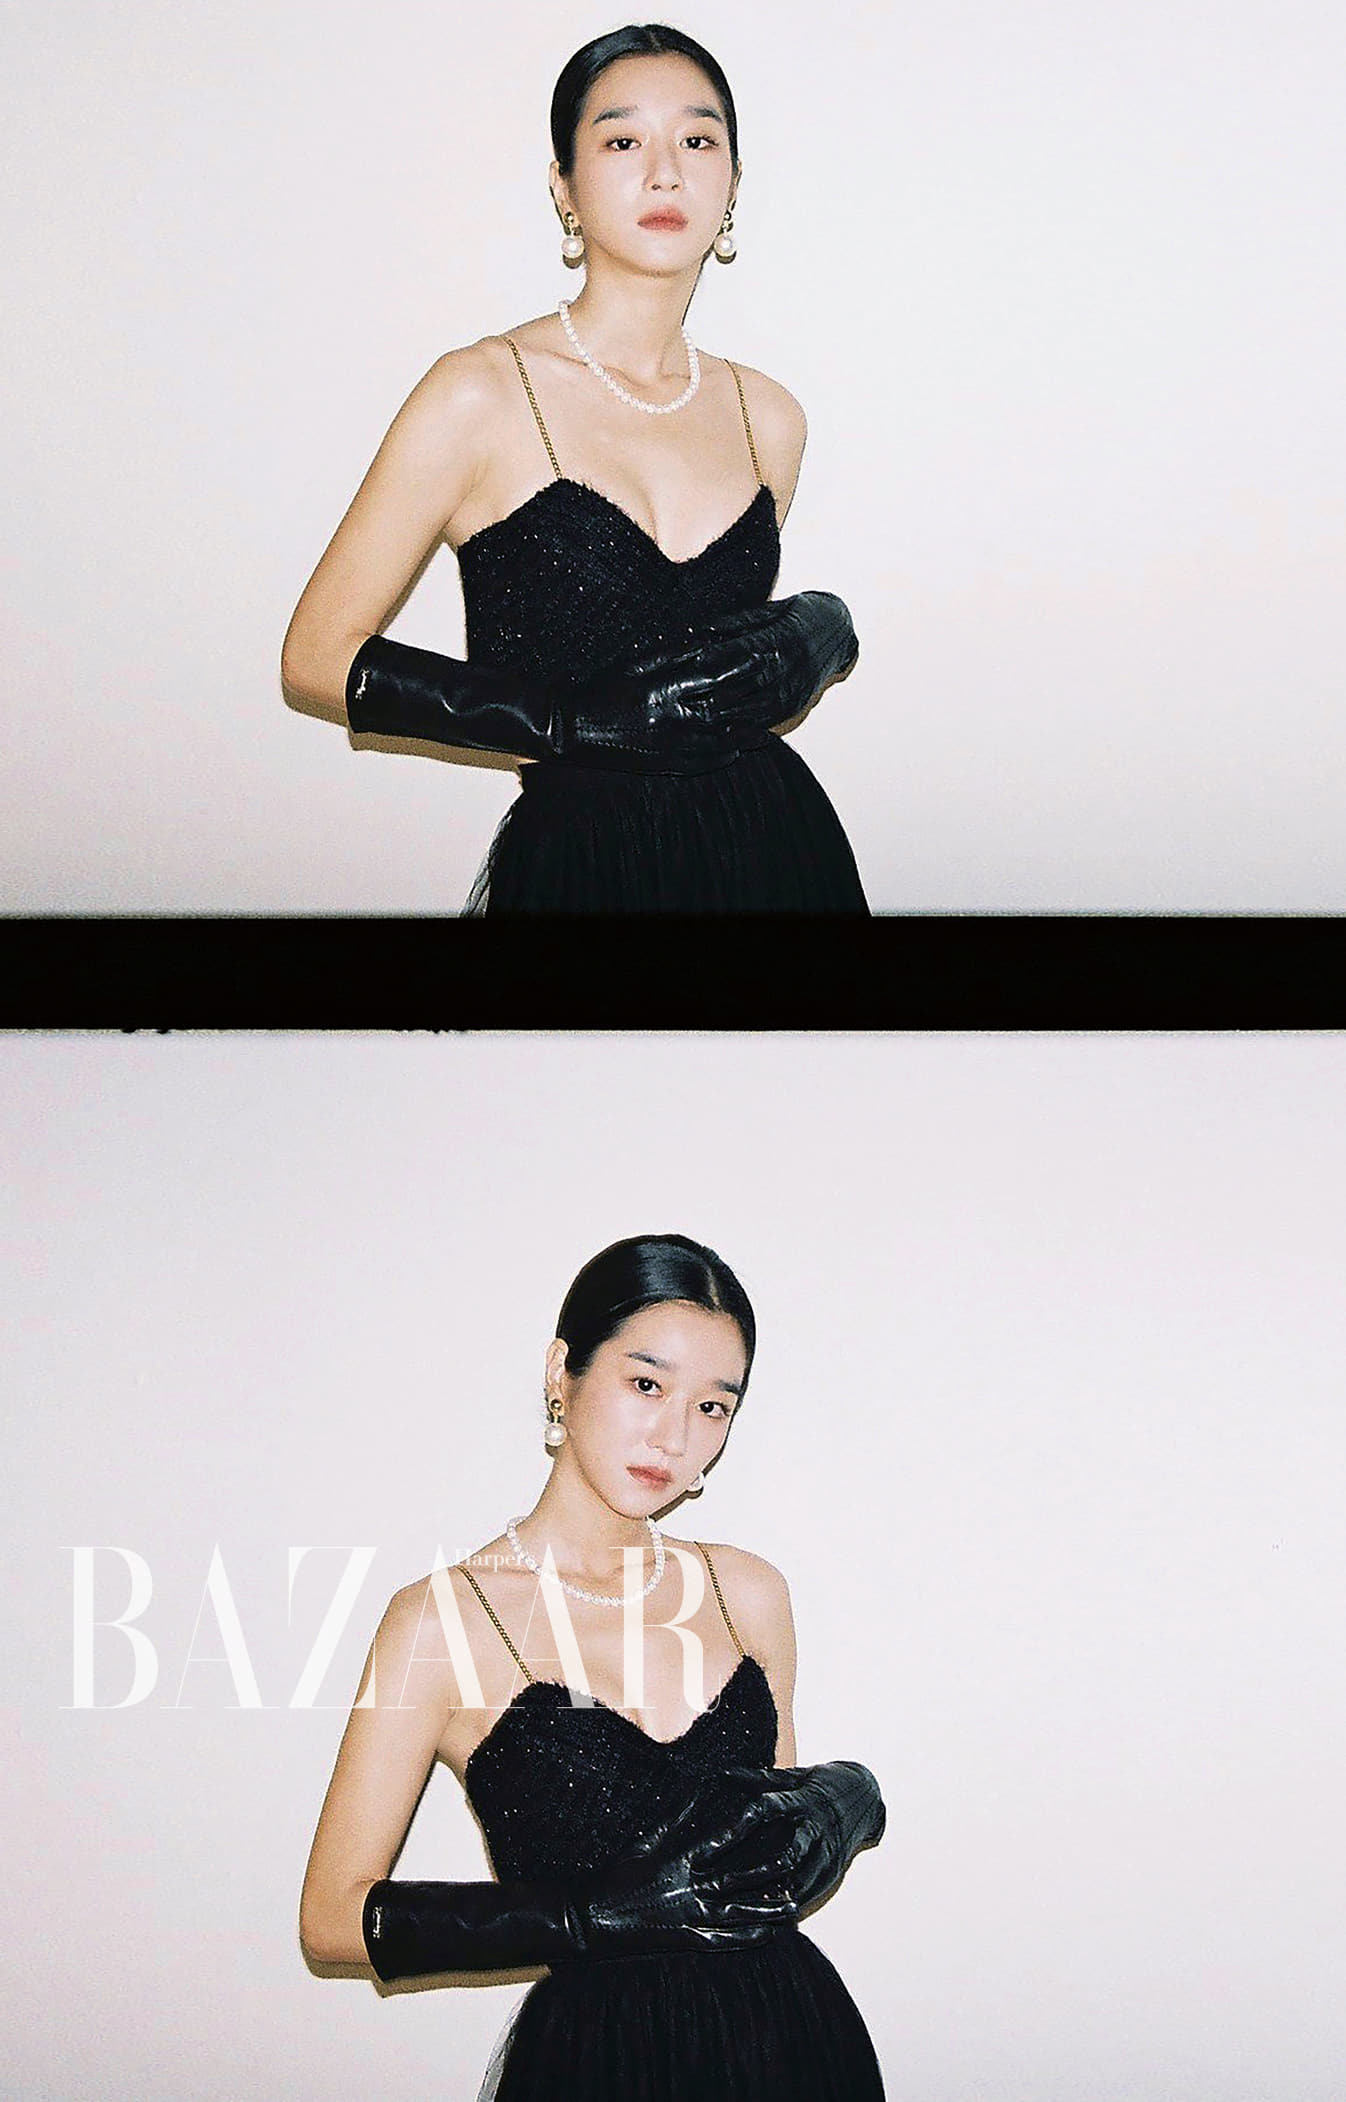 Park Hae Soo and Seo Ye-ji showed off their extraordinary atmosphere.Park Hae Soo, Seo Ye-jis picture and interview of the movie Quantum Physics, which is about to be released on September 25, will be released through the September issue of Bazaar.This picture, which was co-worked by two actors who played impressive performances on TV and movies, was a unique concept reflecting the unique atmosphere of the movie.Using a film camera with two cuts in one frame, it contains a moment of indifferent and free.As much as we talk about the waves between people, Quantum physics is a work where co-work between the two actors is important.At first, were giving each other a lot of praise, said Seo Ye-ji, and its getting tired and not lasting for two weeks.(Laughing) We were constantly giving praise and receiving from the first shooting to the last shooting. Park Hae Soo said, It is a cool and hairy personality. There was no wall since I first met.I was uncomfortable and needed to try to overcome it, but I never took time to make such an effort.In addition, Quantum physics, there are a lot of actors like Byun Hee-bong, Kim Eung-soo, and Kim Sang-ho Actor.Both senior actors and contemporaries were very caring about each other as well as fulfilling their roles, said Seo Ye-ji.It was so good that it was hard to say anything, Park Hae Soo said, and Park Hae Soo is a real friend of Lim Chul-soo Actor, who is a combo with the role of club director.He is a junior at college, a fellow actor, and a soulmate who has lived with him for decades.I will feel a special intimacy when I see a movie. Quantum physics is a surrogate satisfaction crime entertainment drama in which the entertainment world Lee Chan-woo, which uses Quantum physics beliefs as the motto of life, is engaged in the drug case of famous entertainers,More pictorials and interviews of the two actors Park Hae Soo and Seo Ye-ji, the main characters of the film, can also be found on the Bazaar website.Photo = Harpers Bazaar Korea